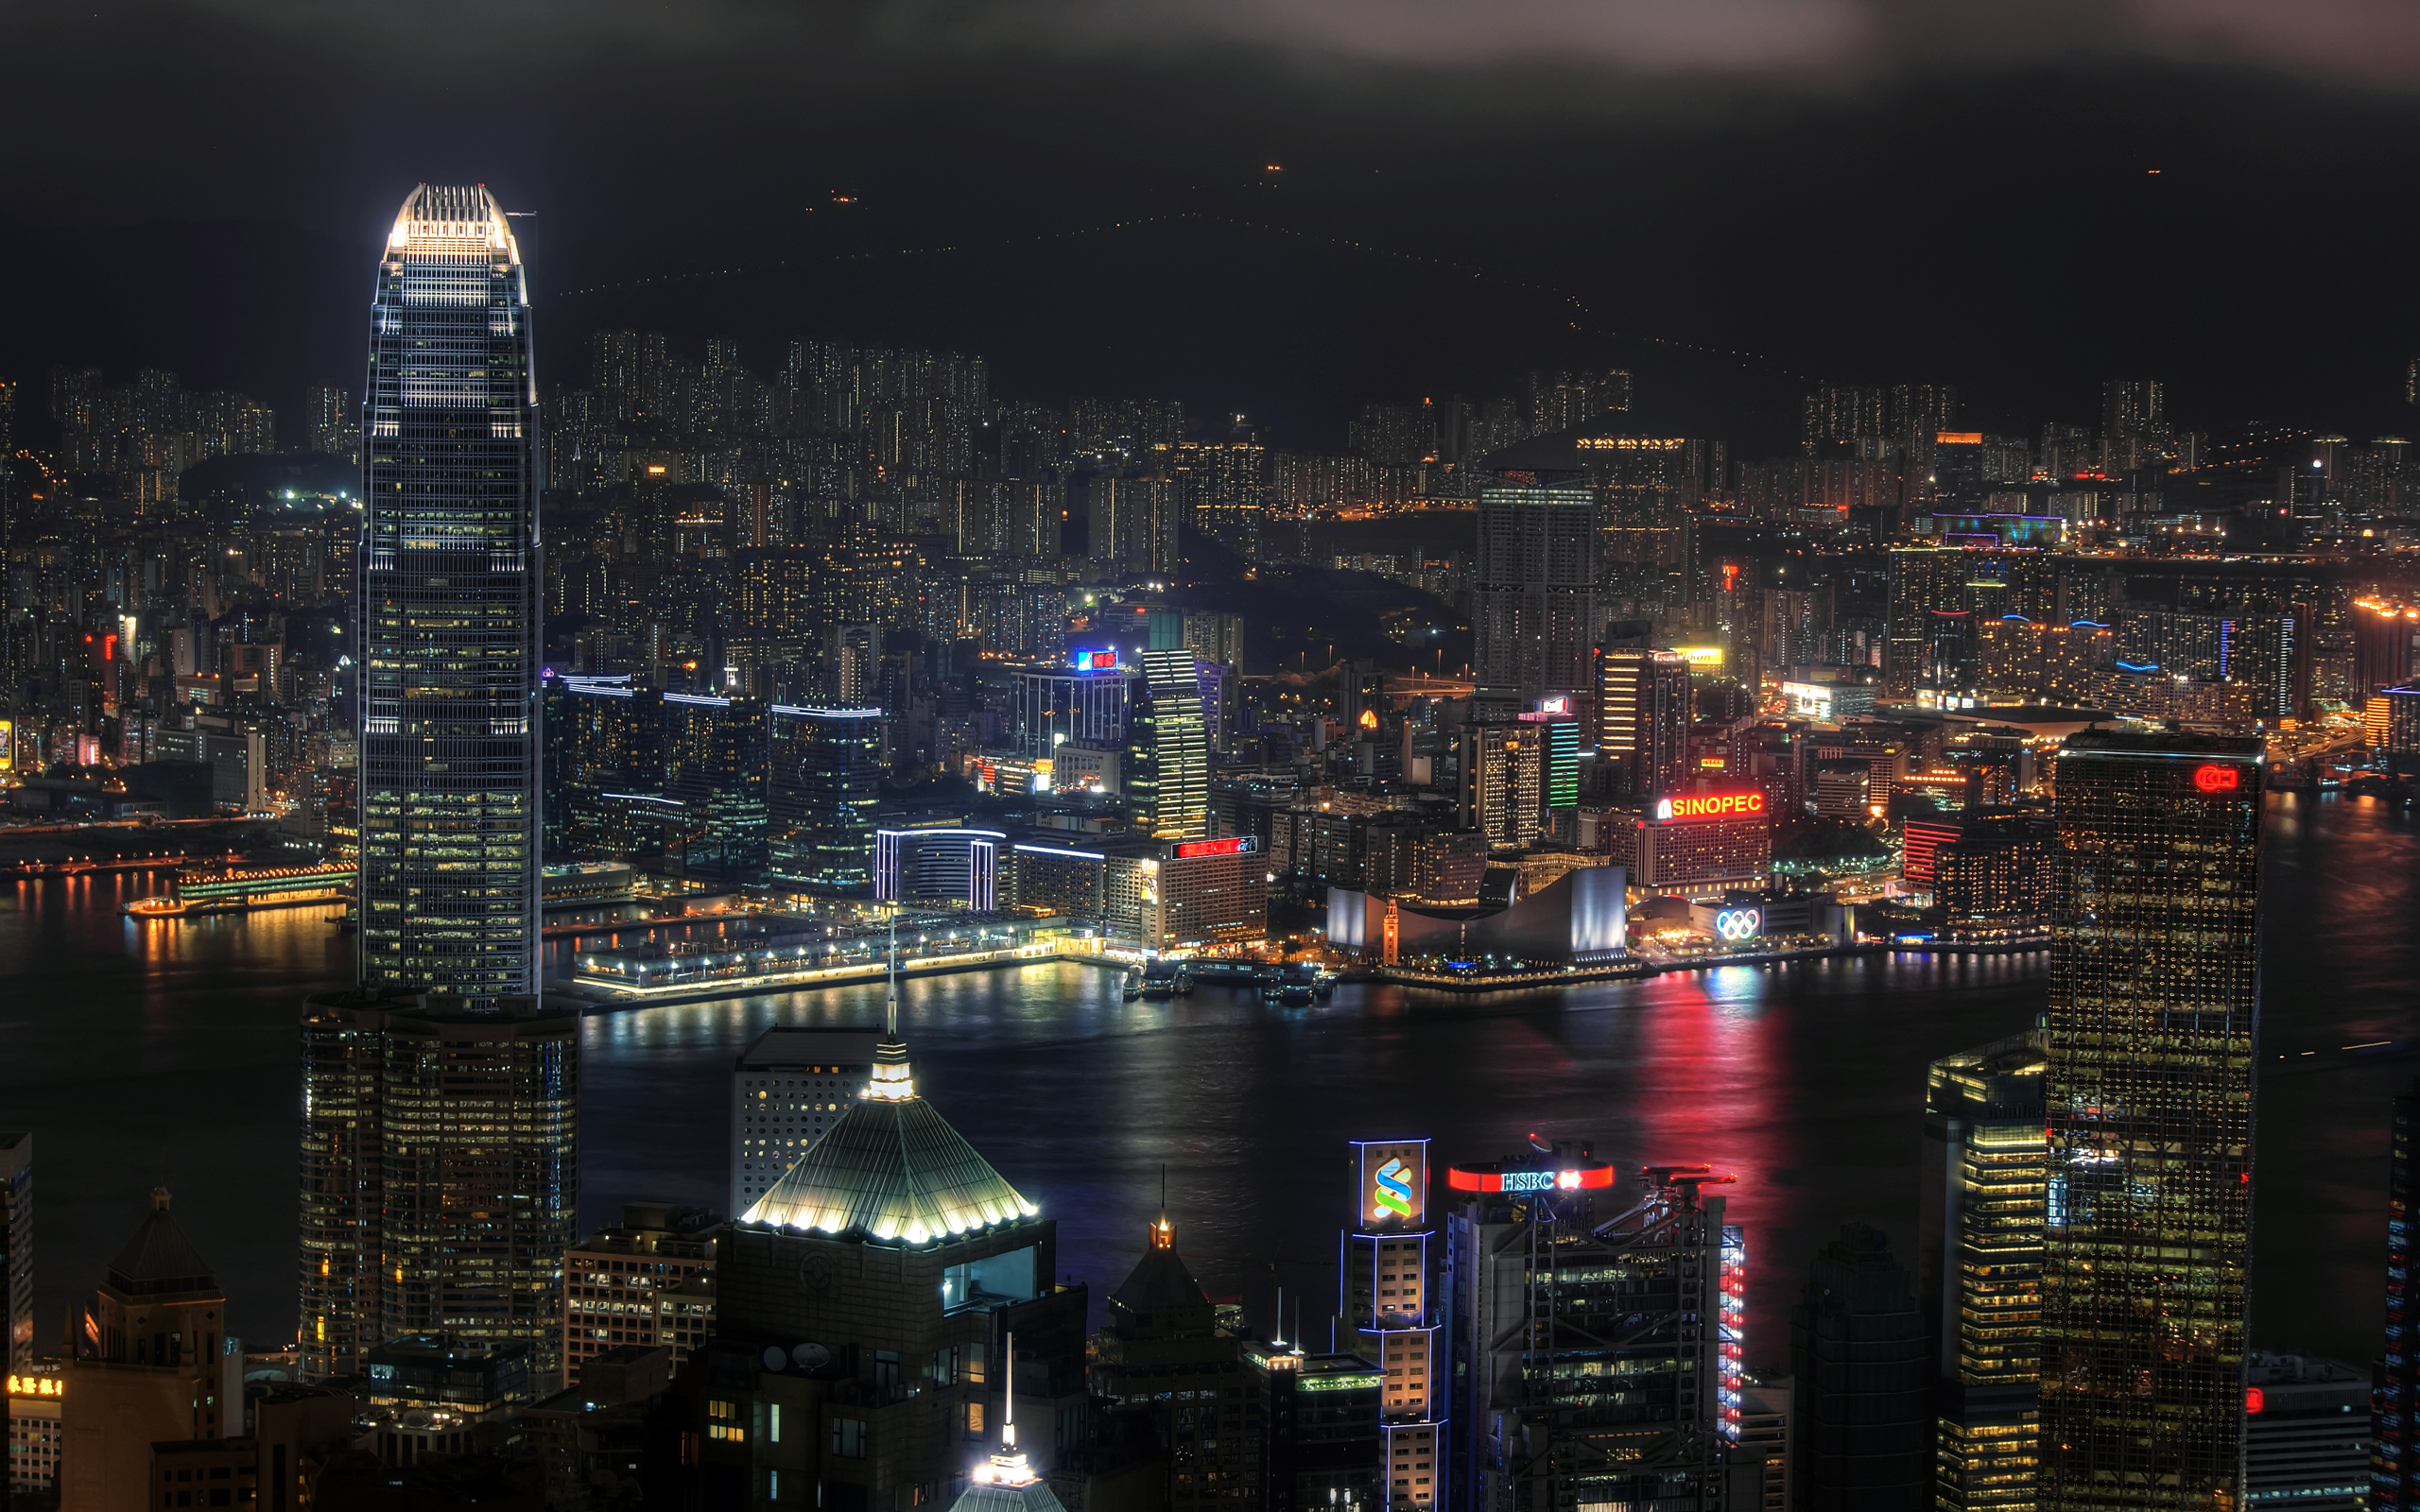 Hong Kong cityscape with towering skyscrapers and urban landscape